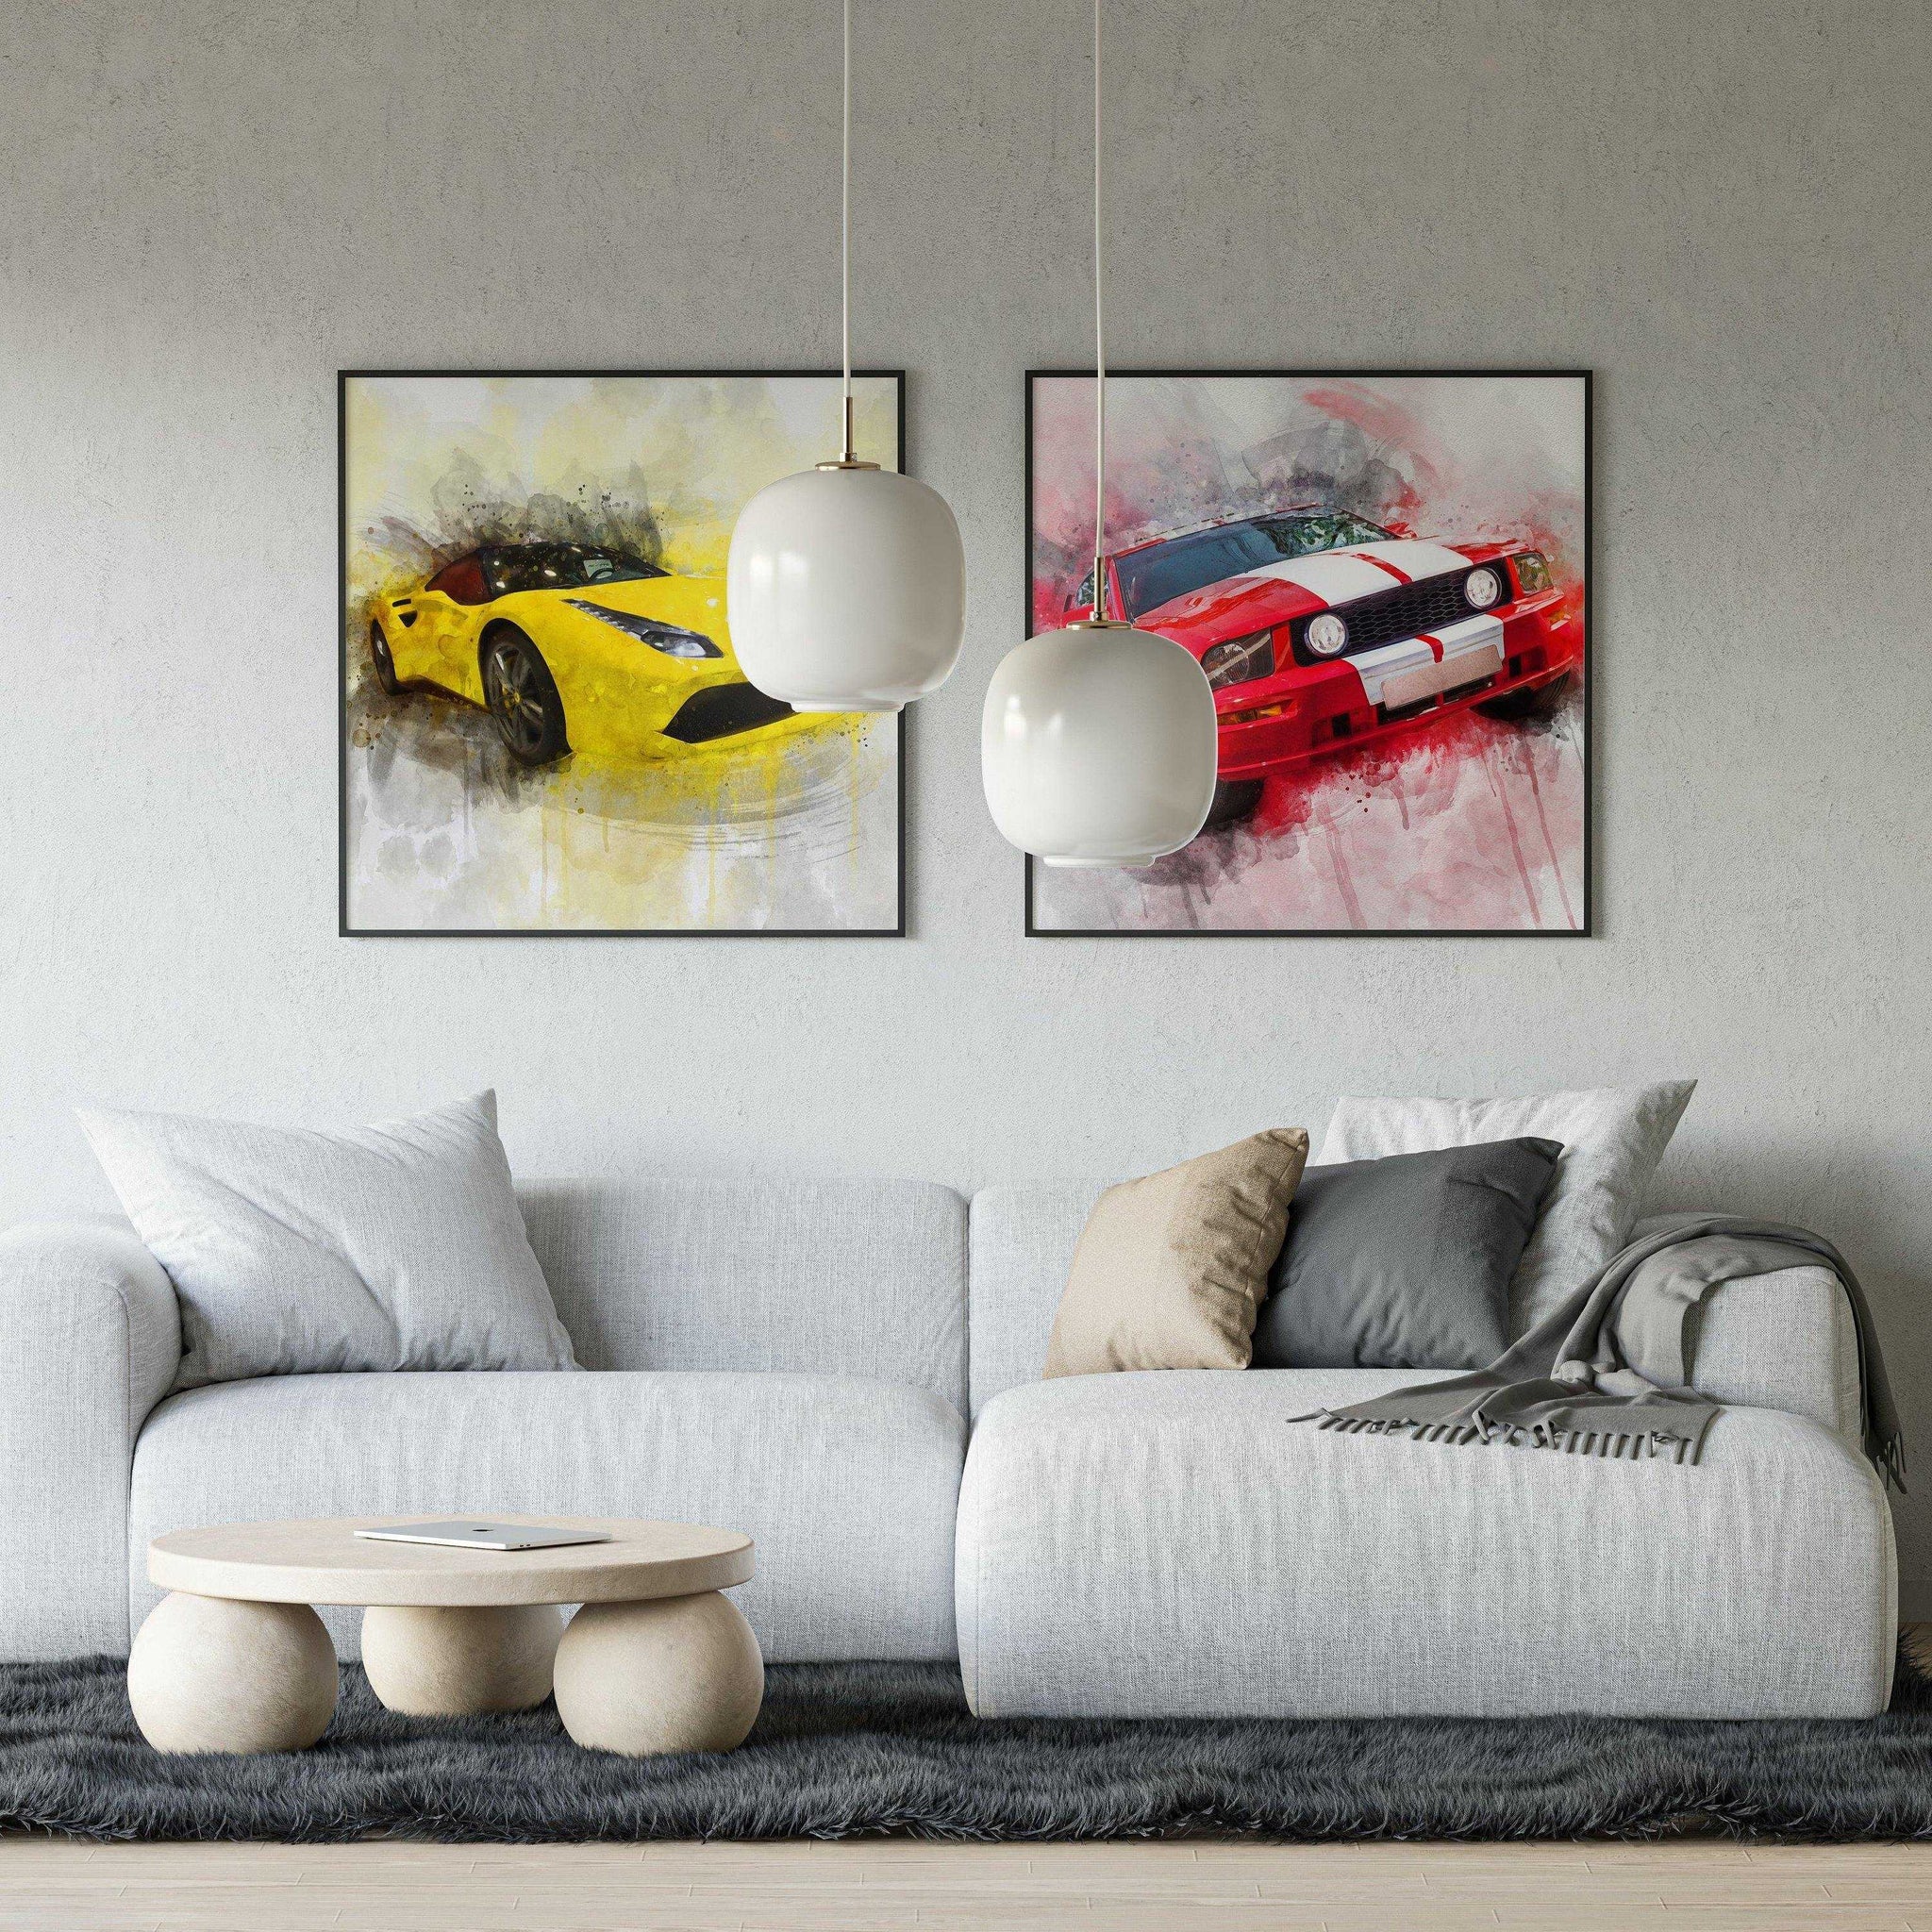 Custom Car Art, Personalized Gifts for Car Lovers, Custom Car Painting From Photo, Personalized Gifts for Car Enthusiasts, Custom Car Portrait - FromPicToArt